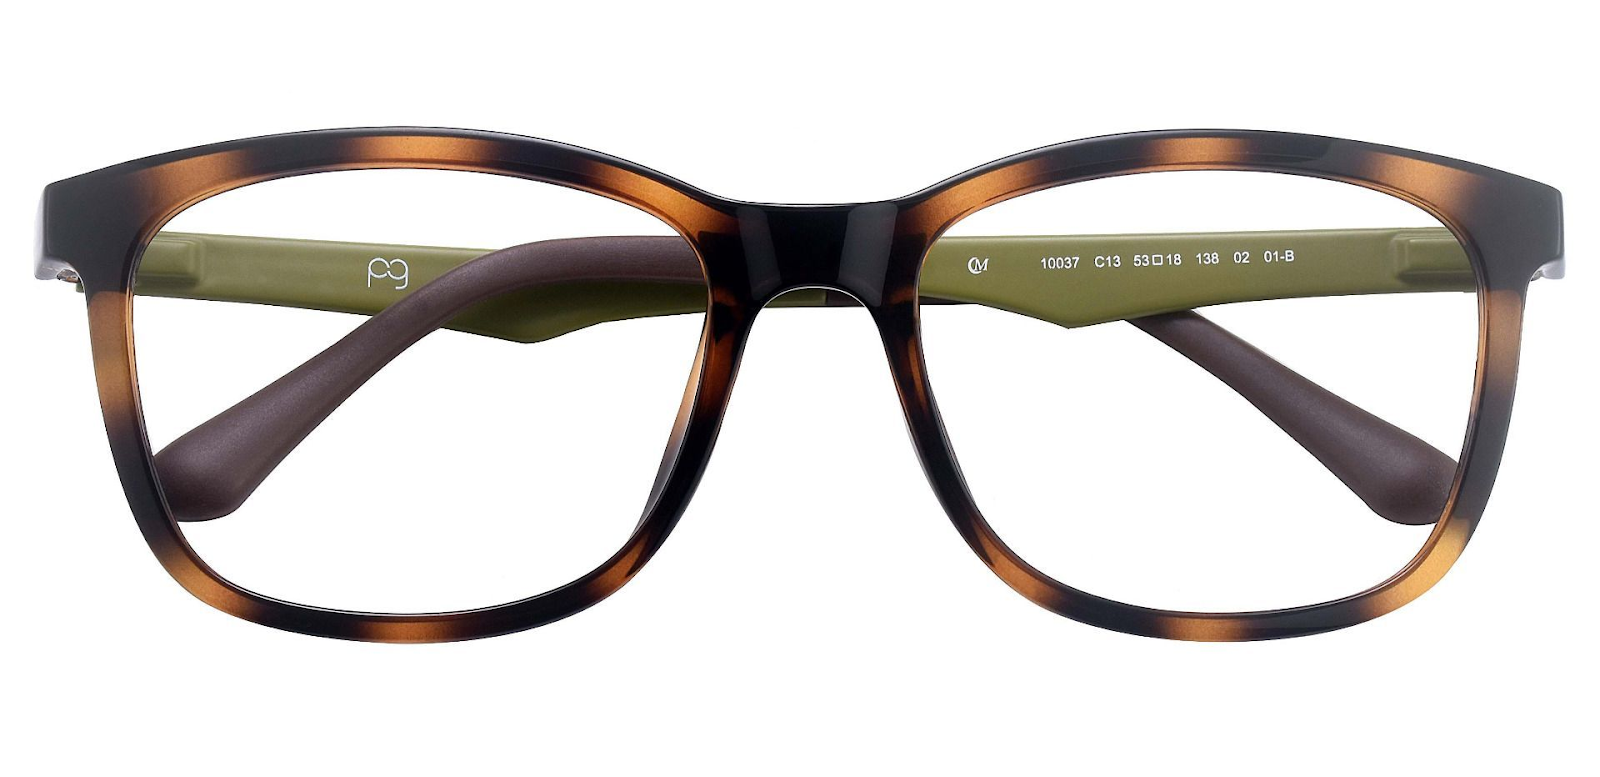 A pair of glasses with tortoiseshell Cairo Classic Square frames.